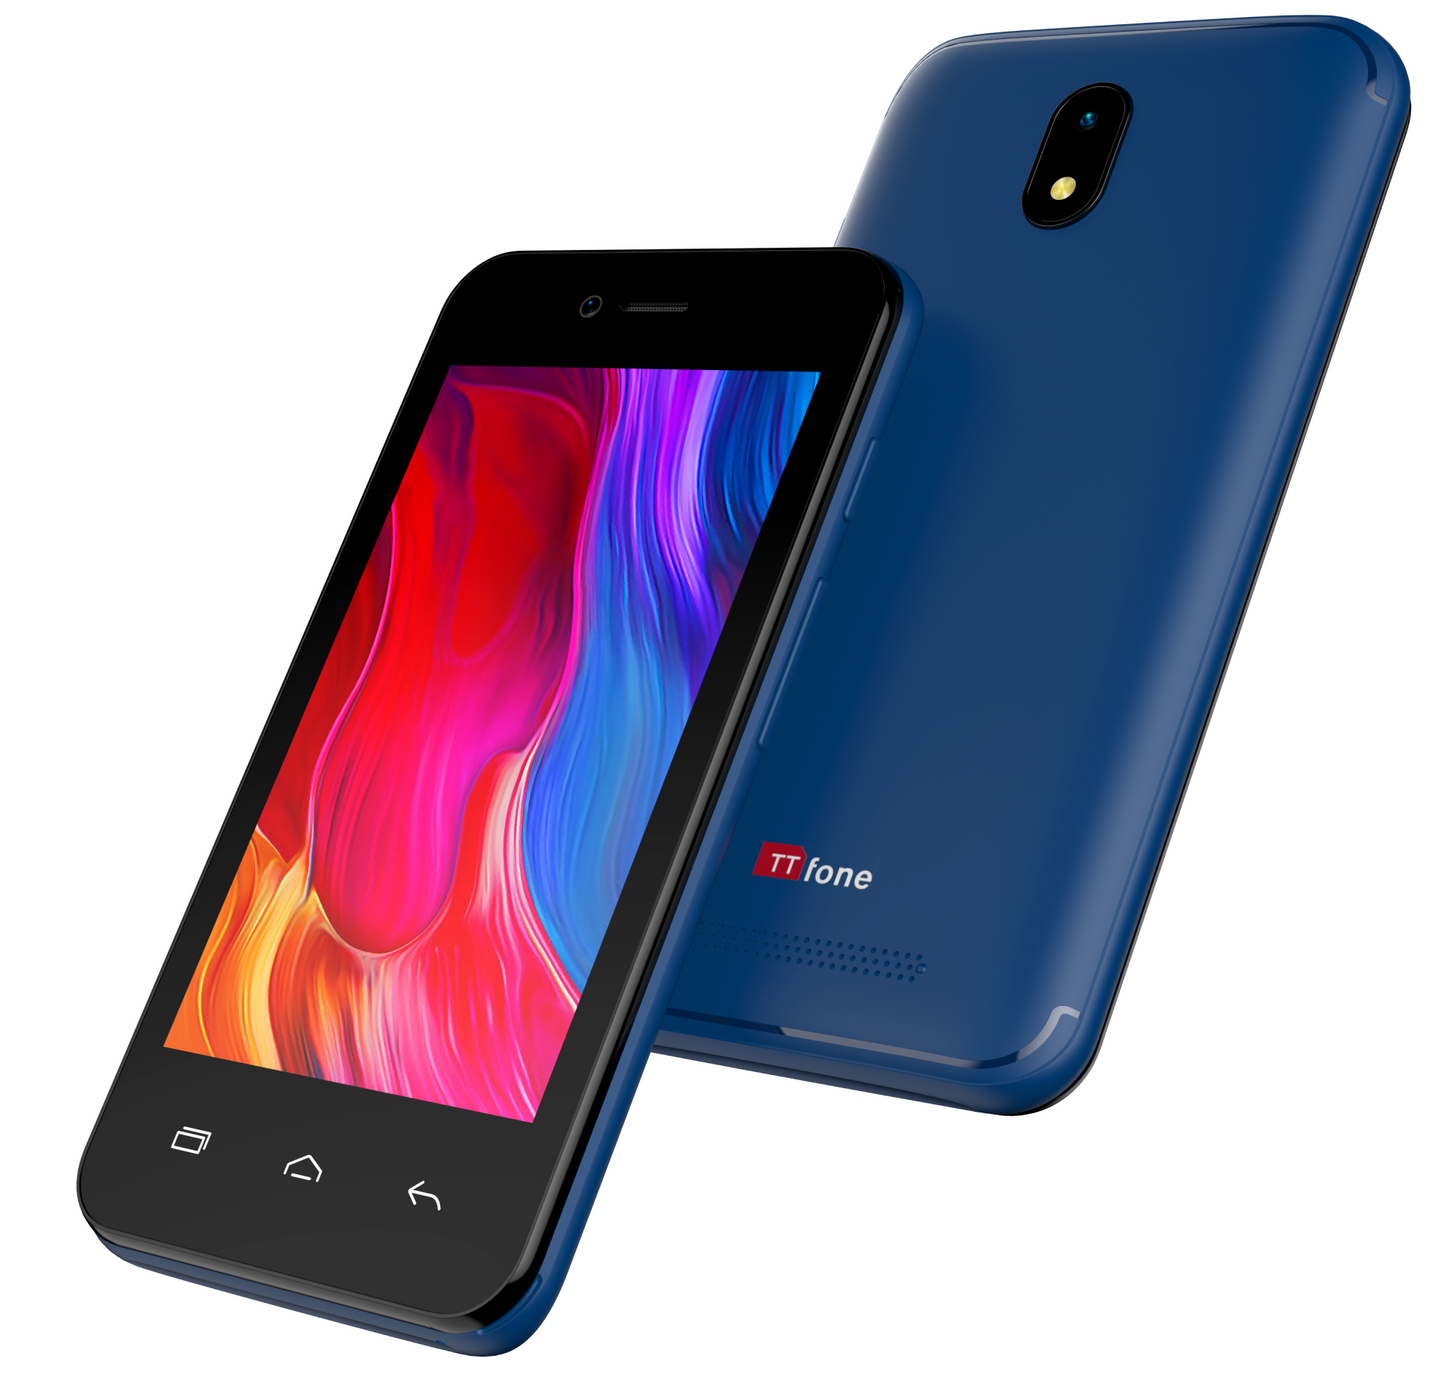 TTfone Blue TT20 Dual SIM - Warehouse Deals with Mains Charger and EE Pay As You Go Sim Card